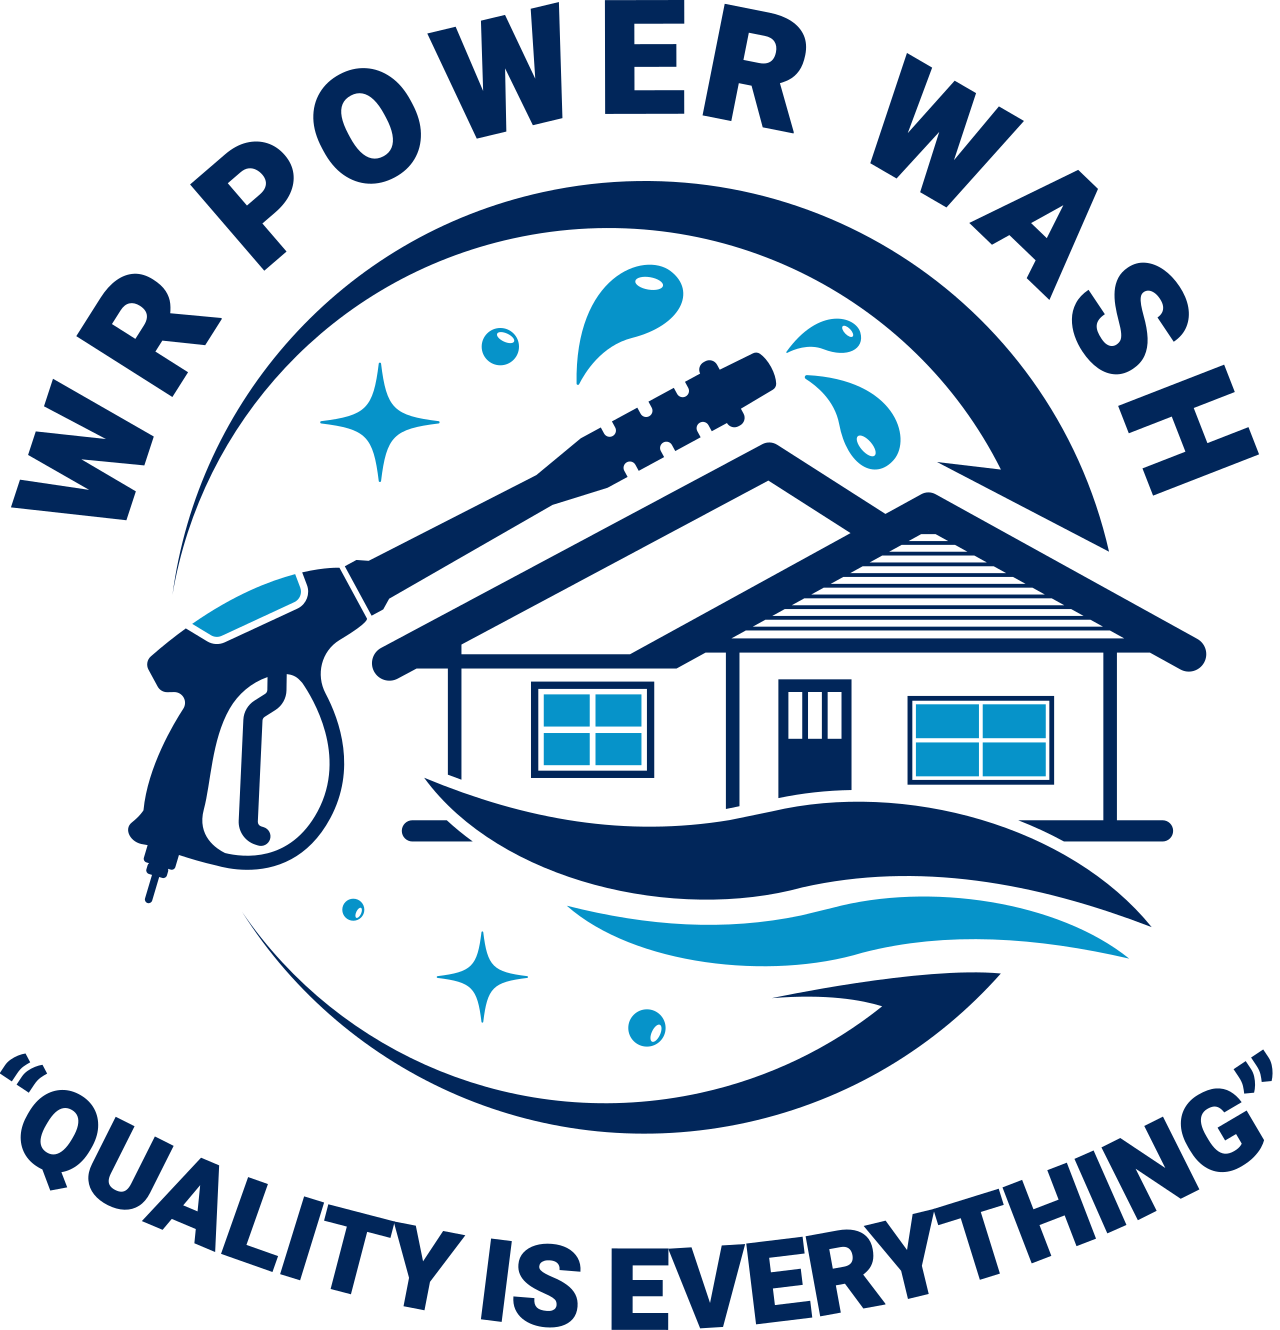 WR POWER WASH 's web page